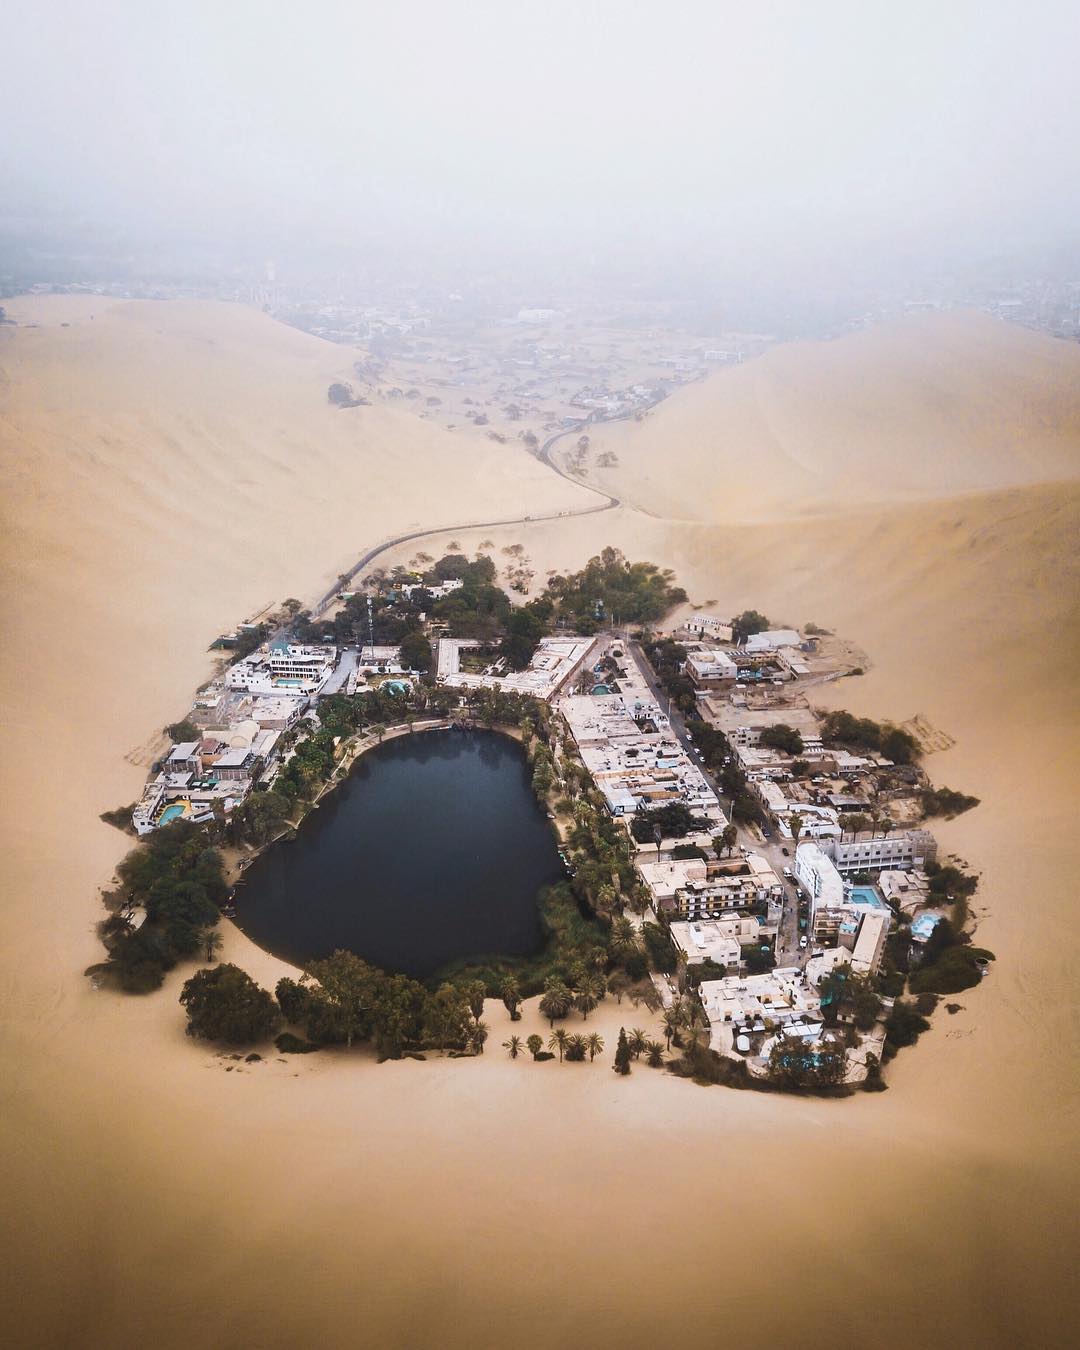 oasis in the midst of a desert